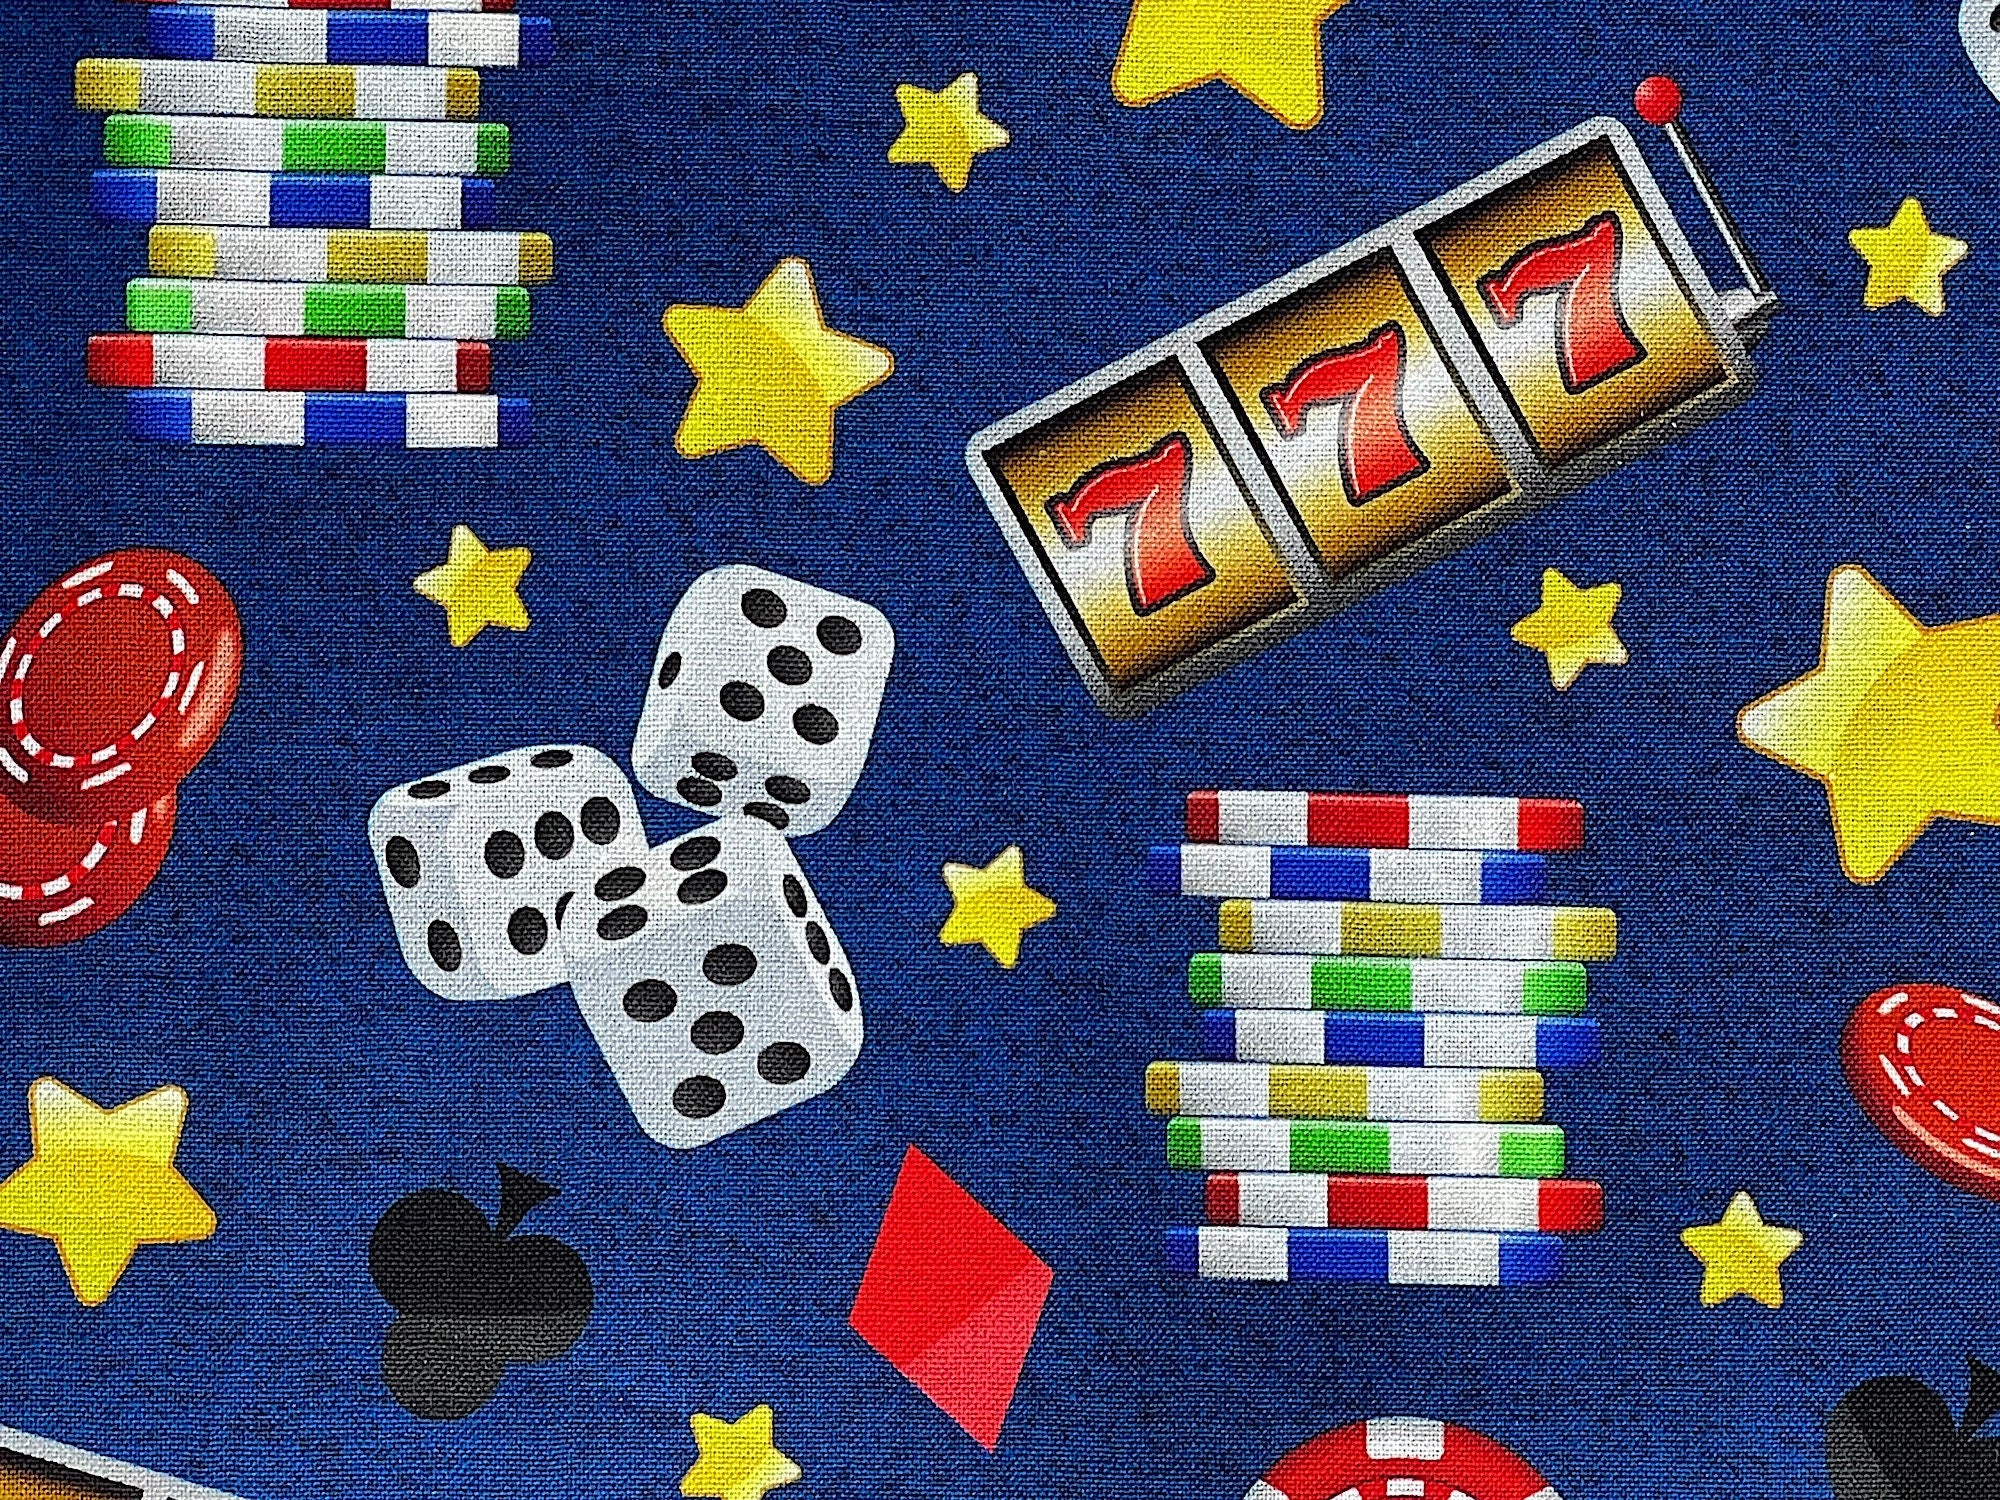 Close up of poker chips, dice, three sevens and more.